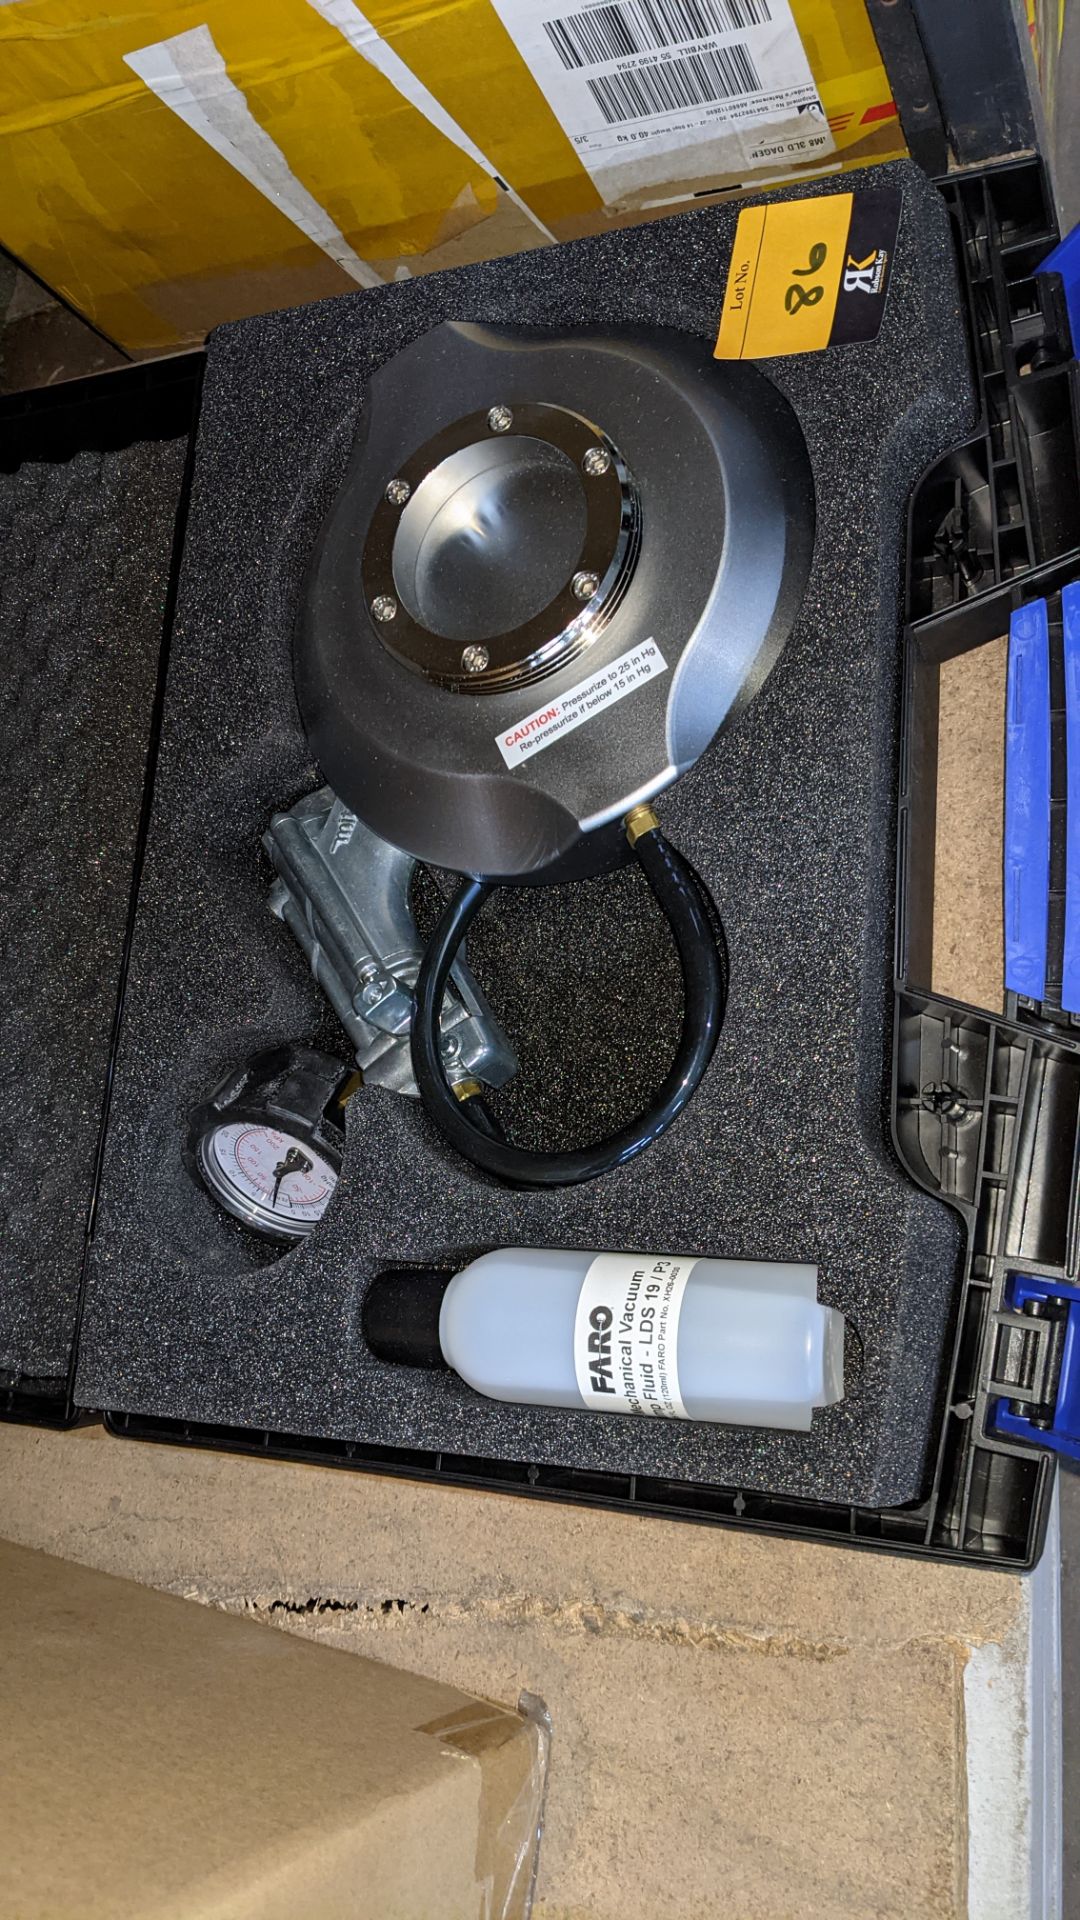 Faro vacuum suction mount for use with Faro inspection arms & similar, complete with case - Image 3 of 7